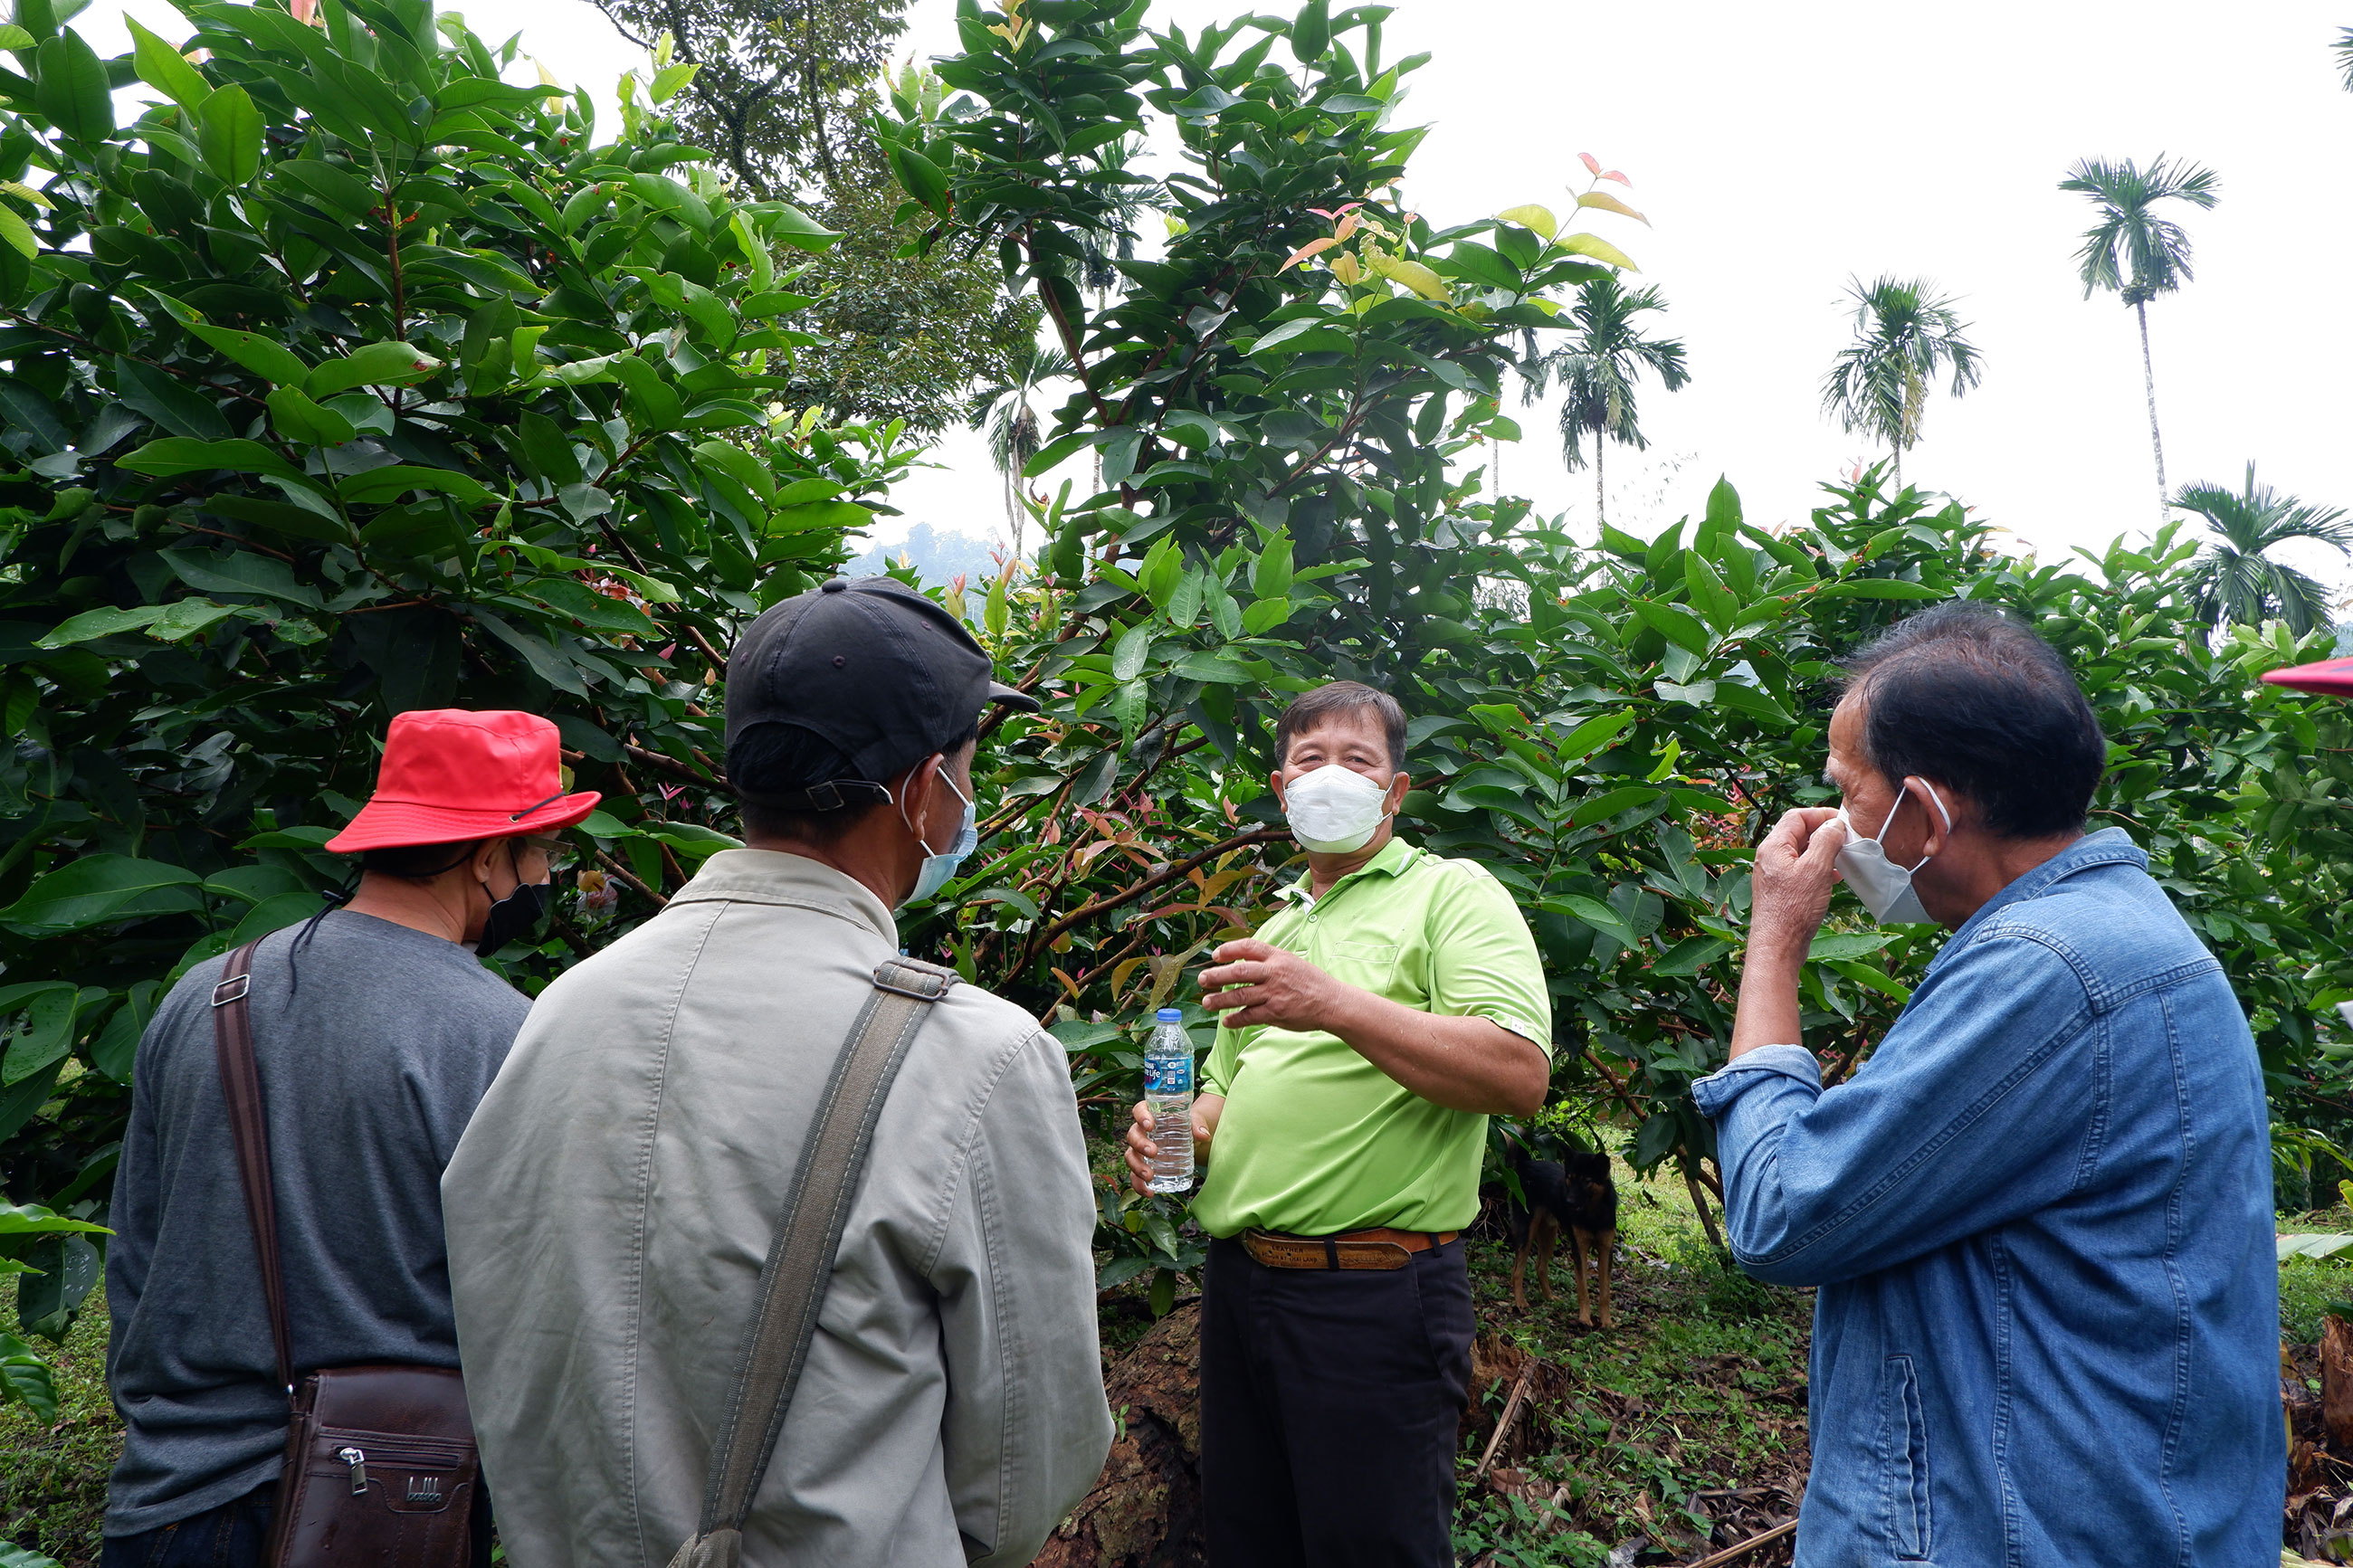 Mr. Samruay Khunthongnoi, Leader of The Community Fertilizer Soil Management Center, showed farmer members from Huai Nai Roi Community Coffee Farmer Group his coffee plot that is well-nourished by the compost from coffee husks made by the group.